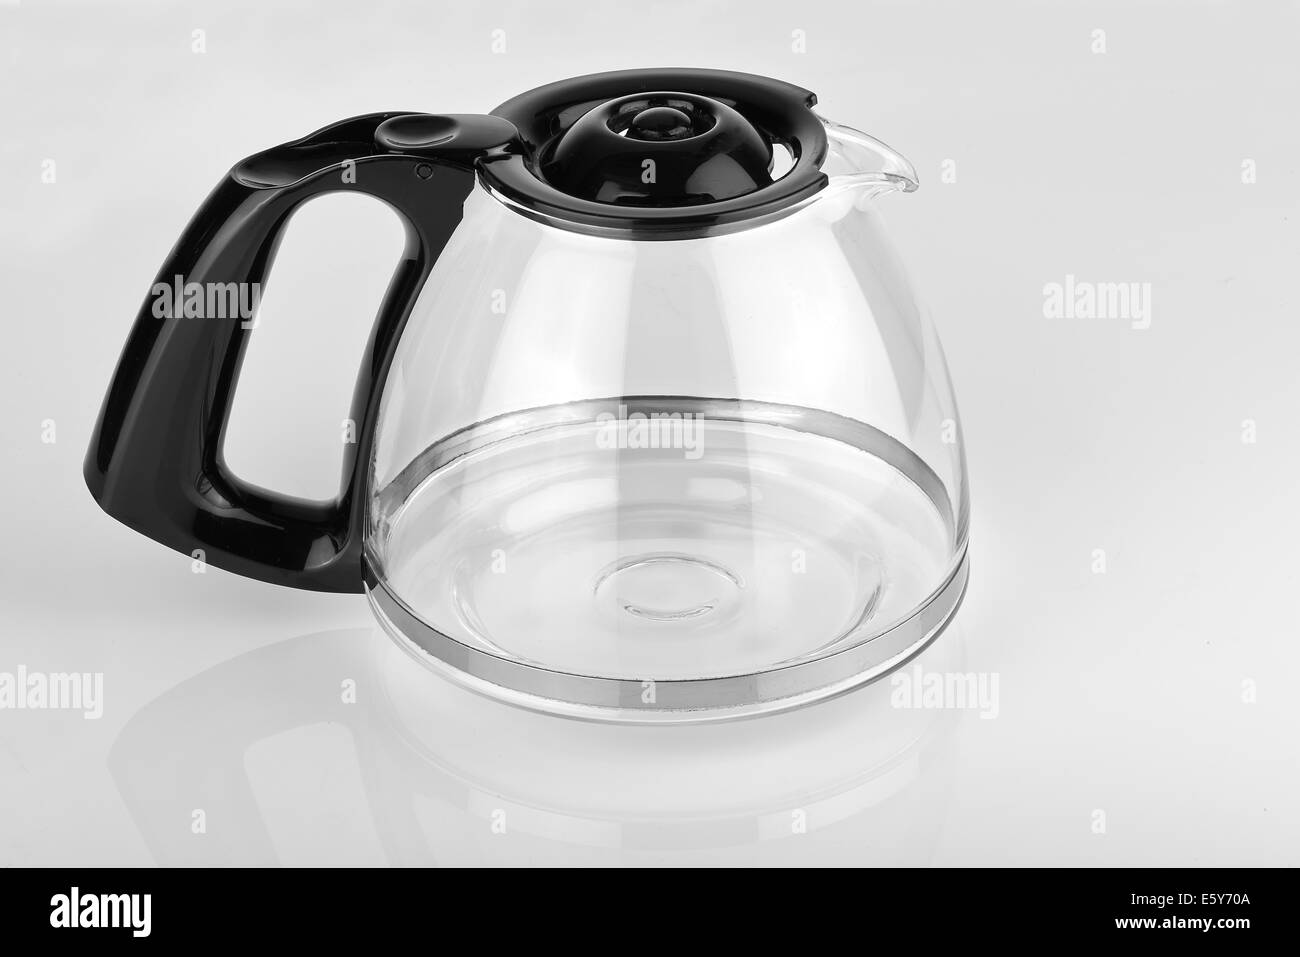 a empty coffee pot on a glossy white table Stock Photo